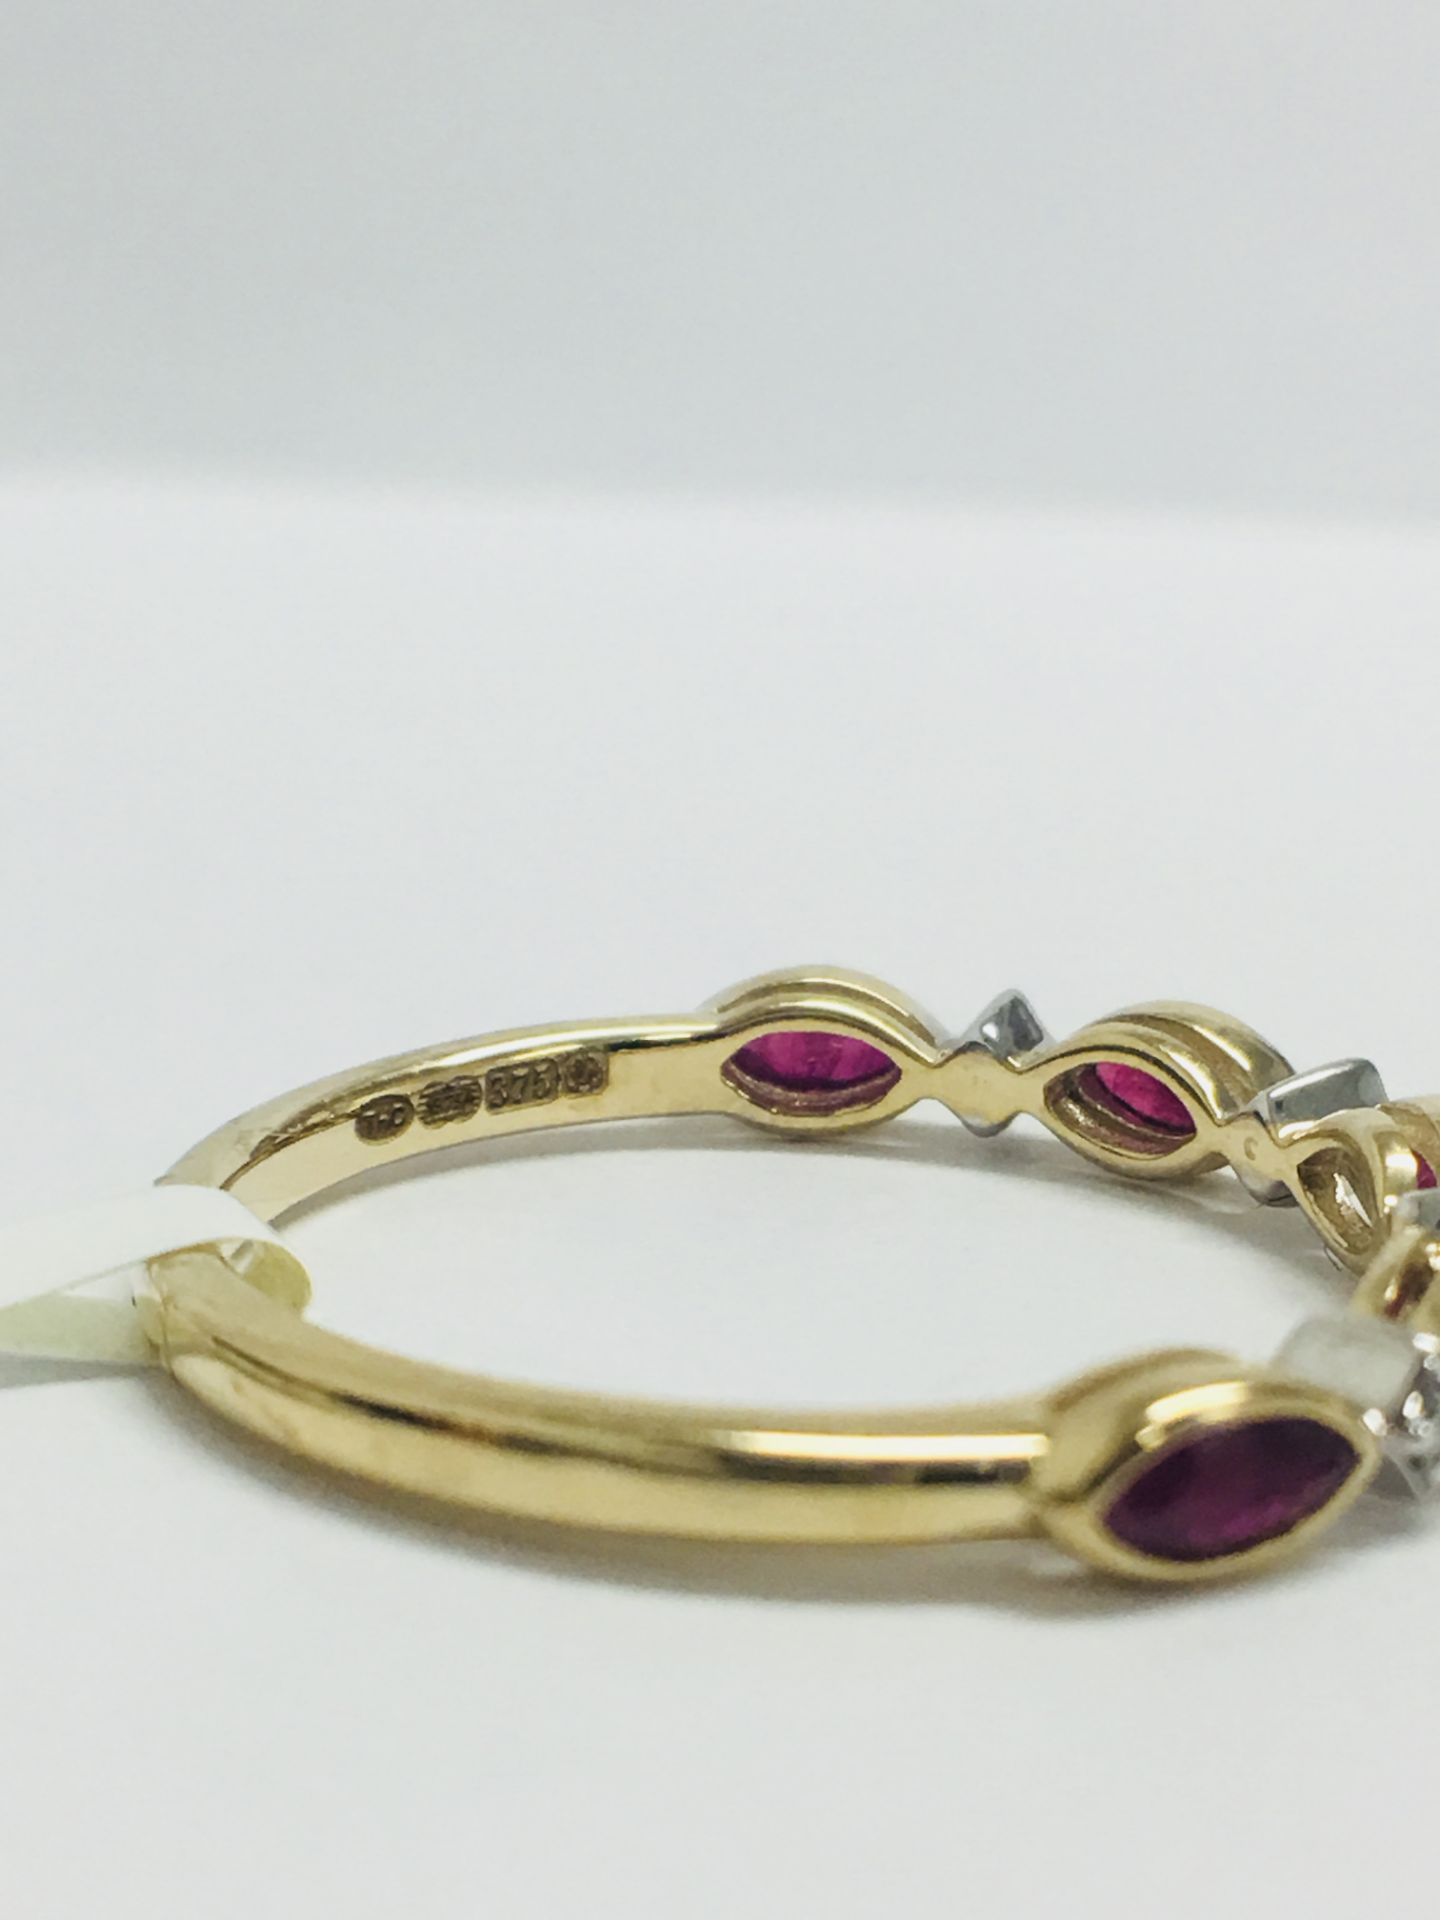 9ct Yellow Gold Ruby Diamond Band Ring - Image 6 of 9